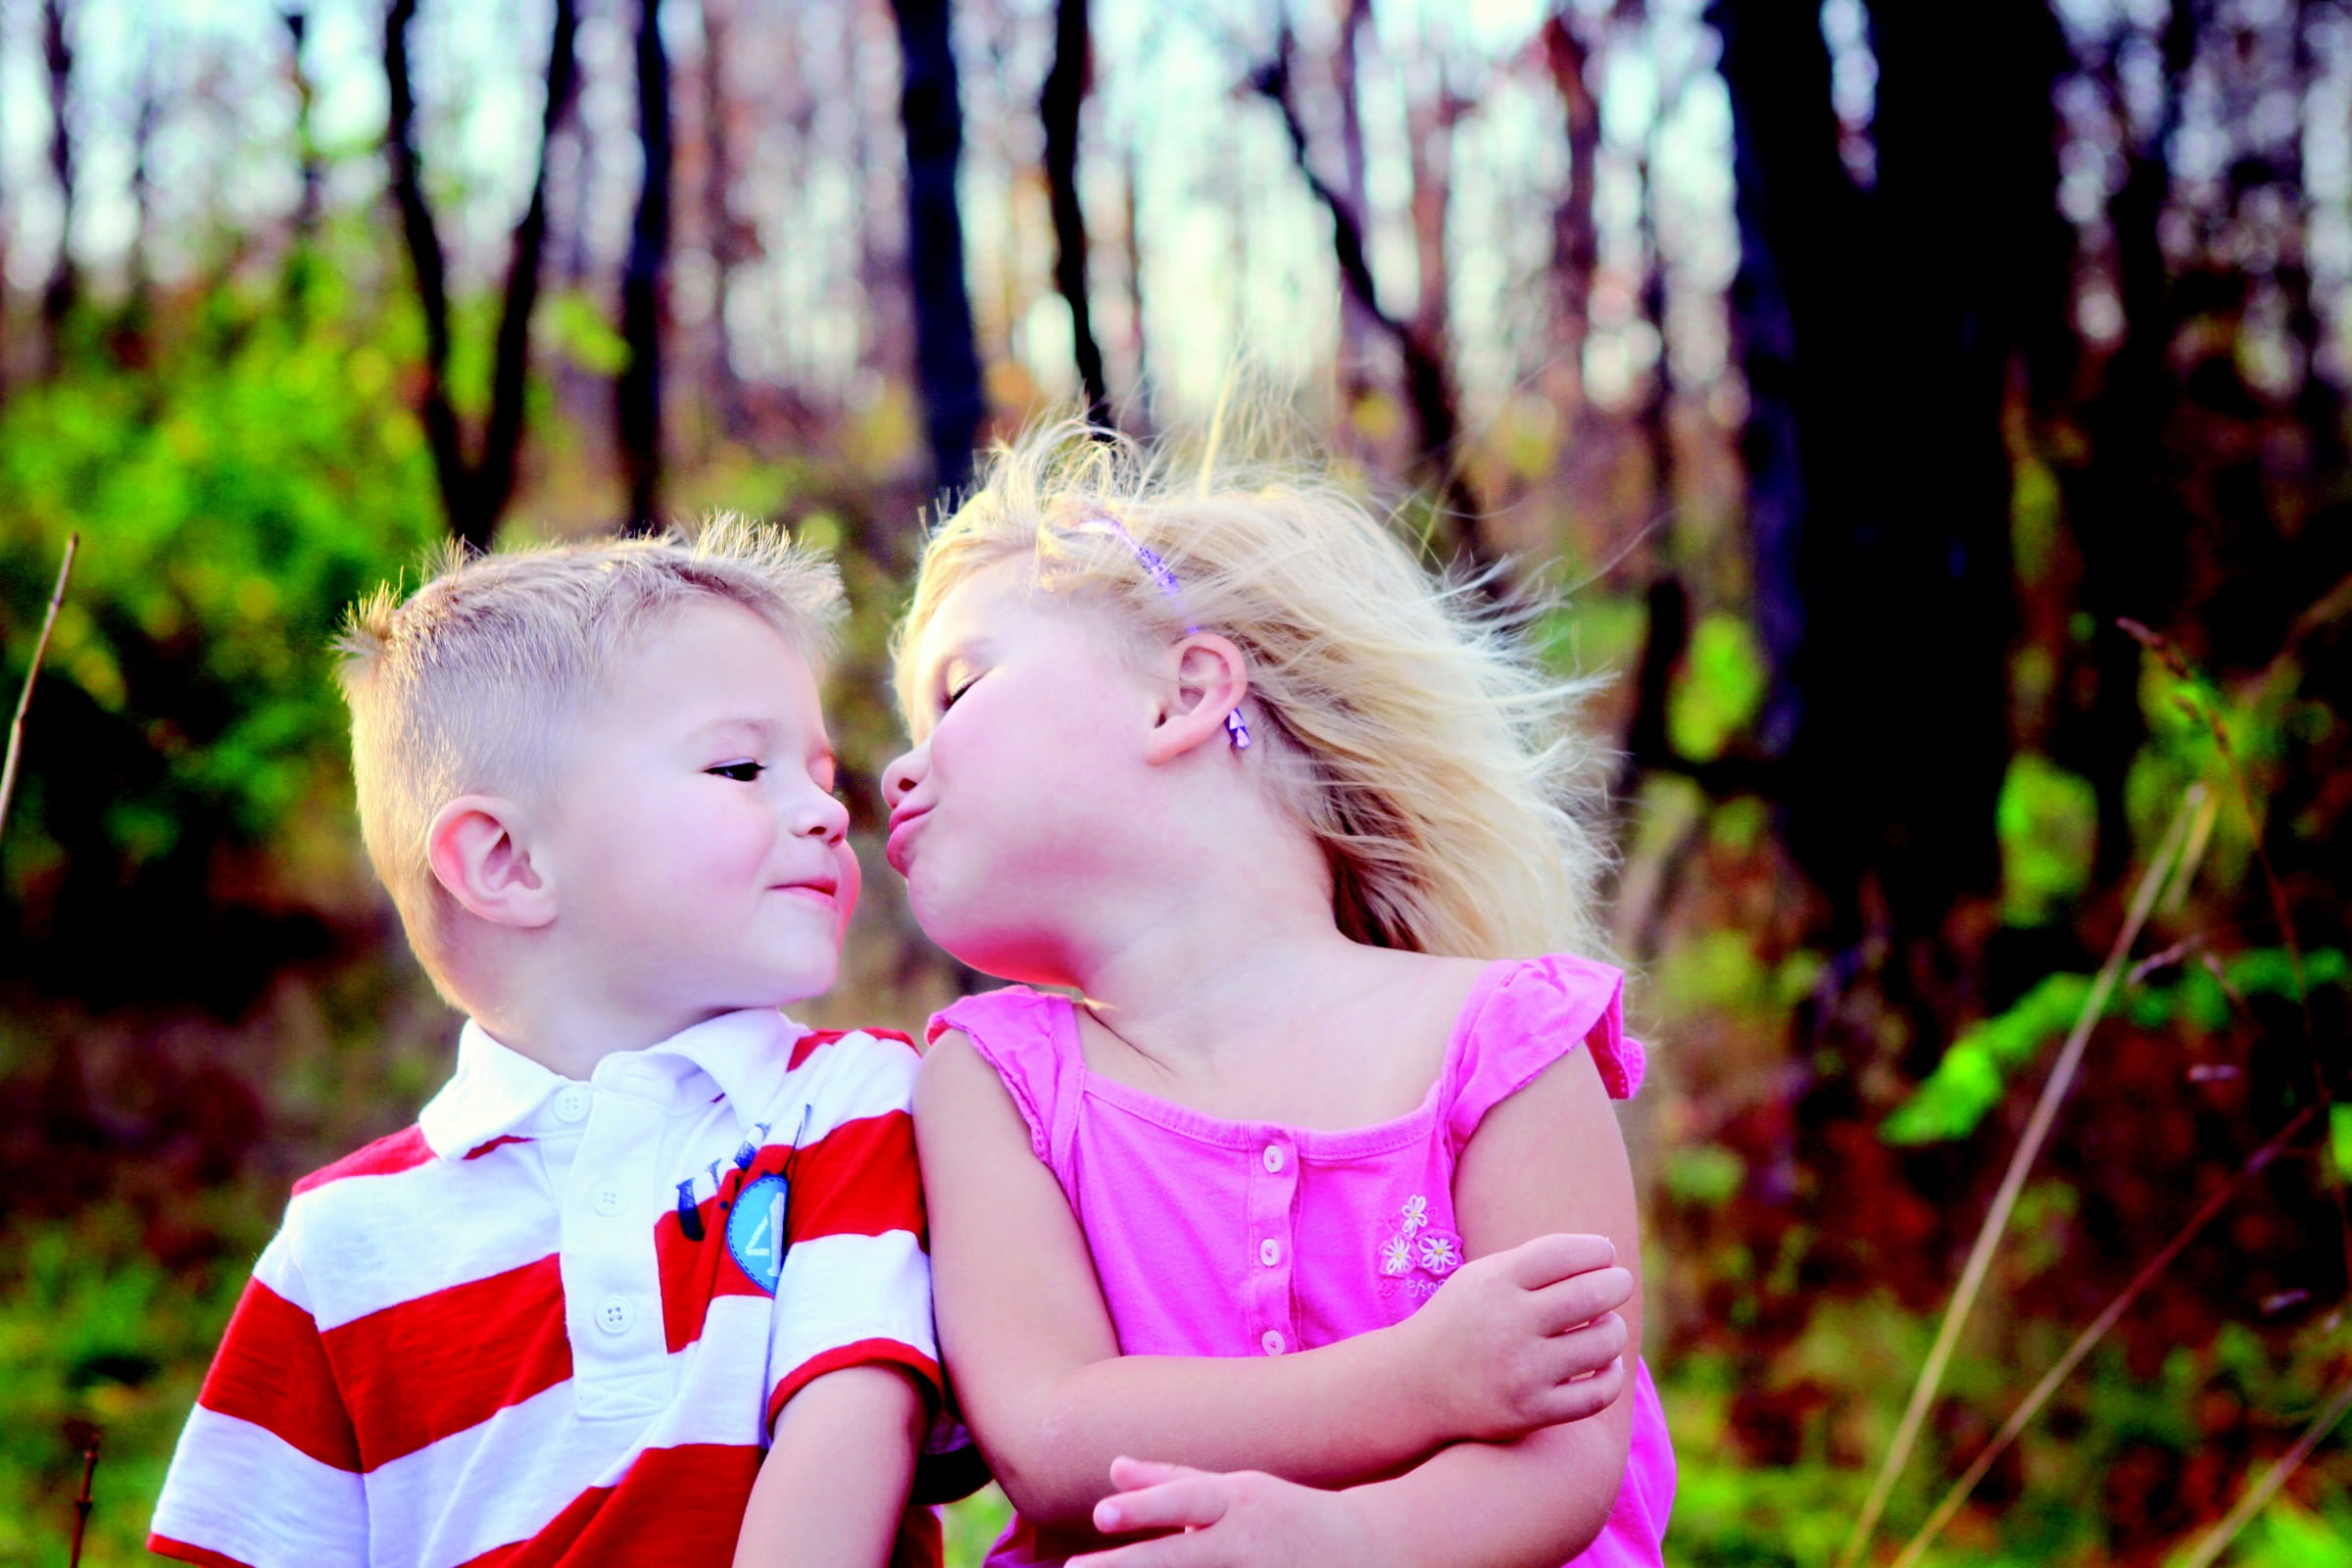 girl and boy near on green leafed plants during daytime, kiss